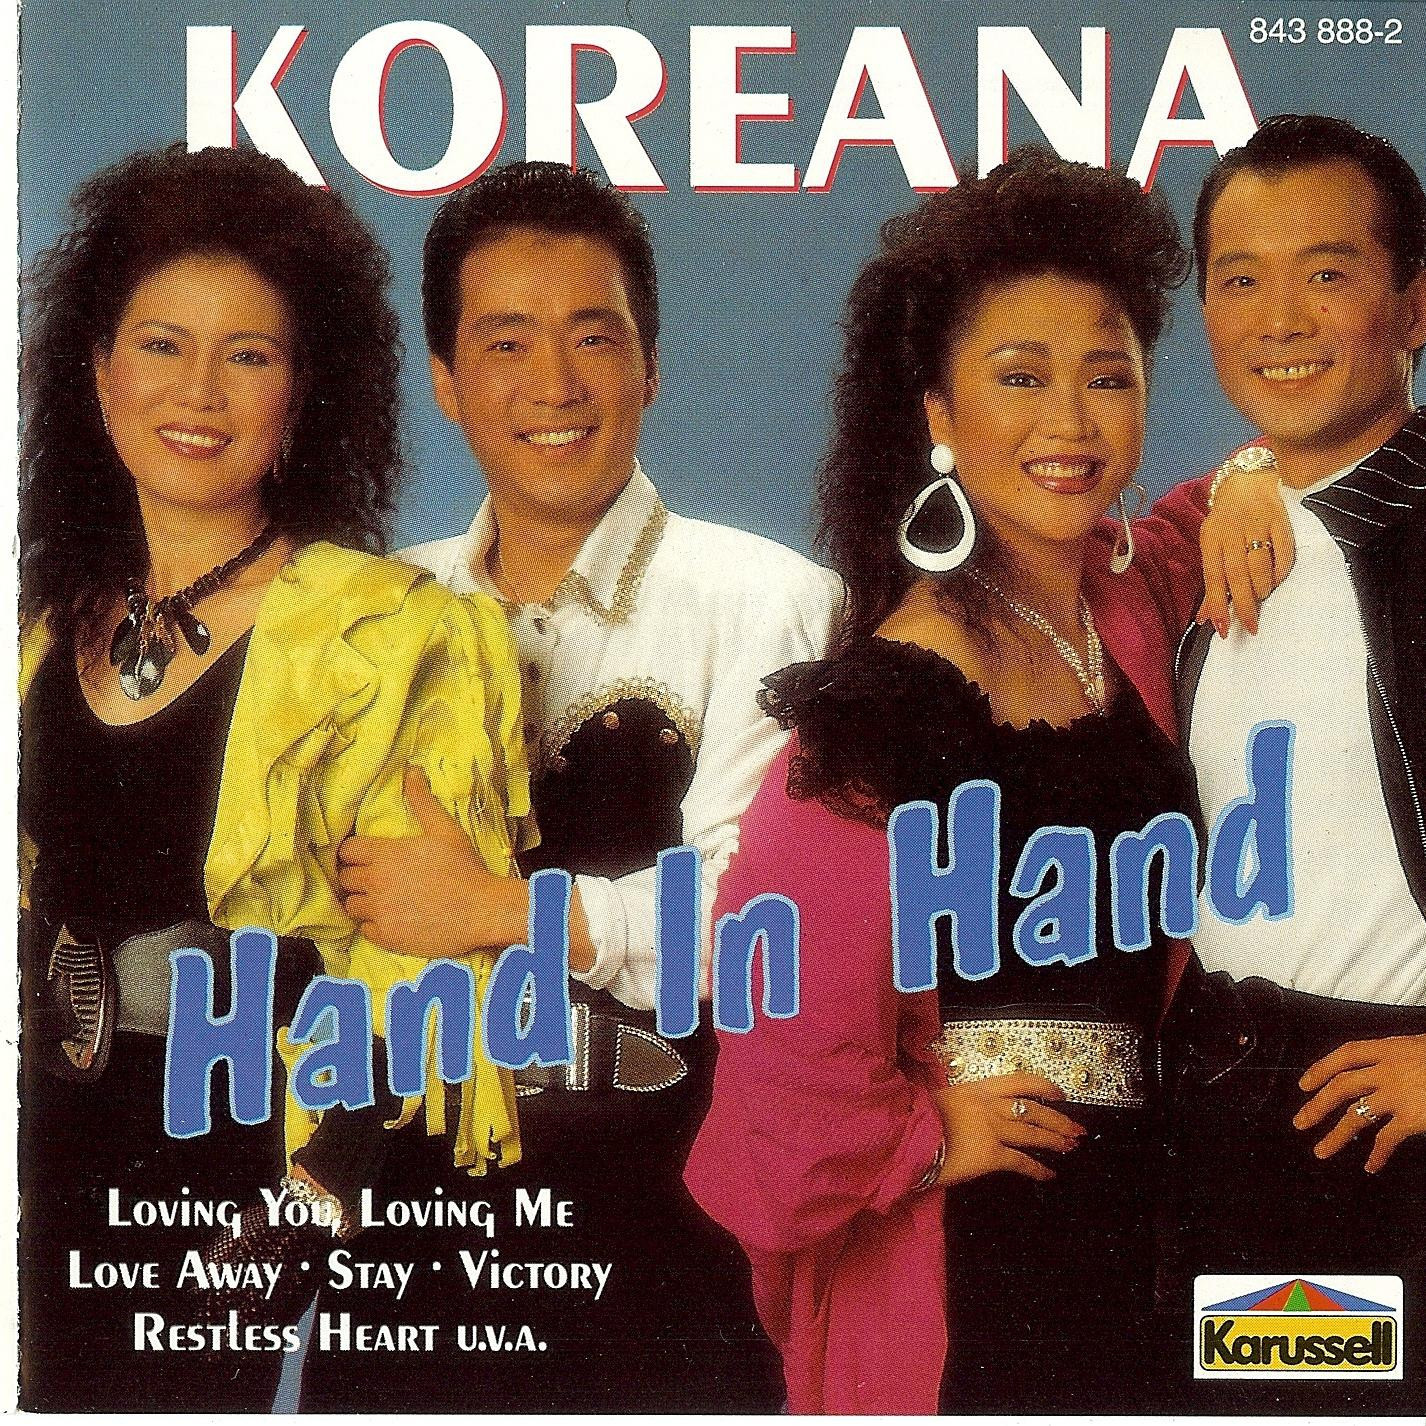 n 1988 the Koreans launched perhaps the most famous Olympic song of all:  ‘Hand in Hand’ by Georgio Moroder and Tom Whitlock ©Karussell